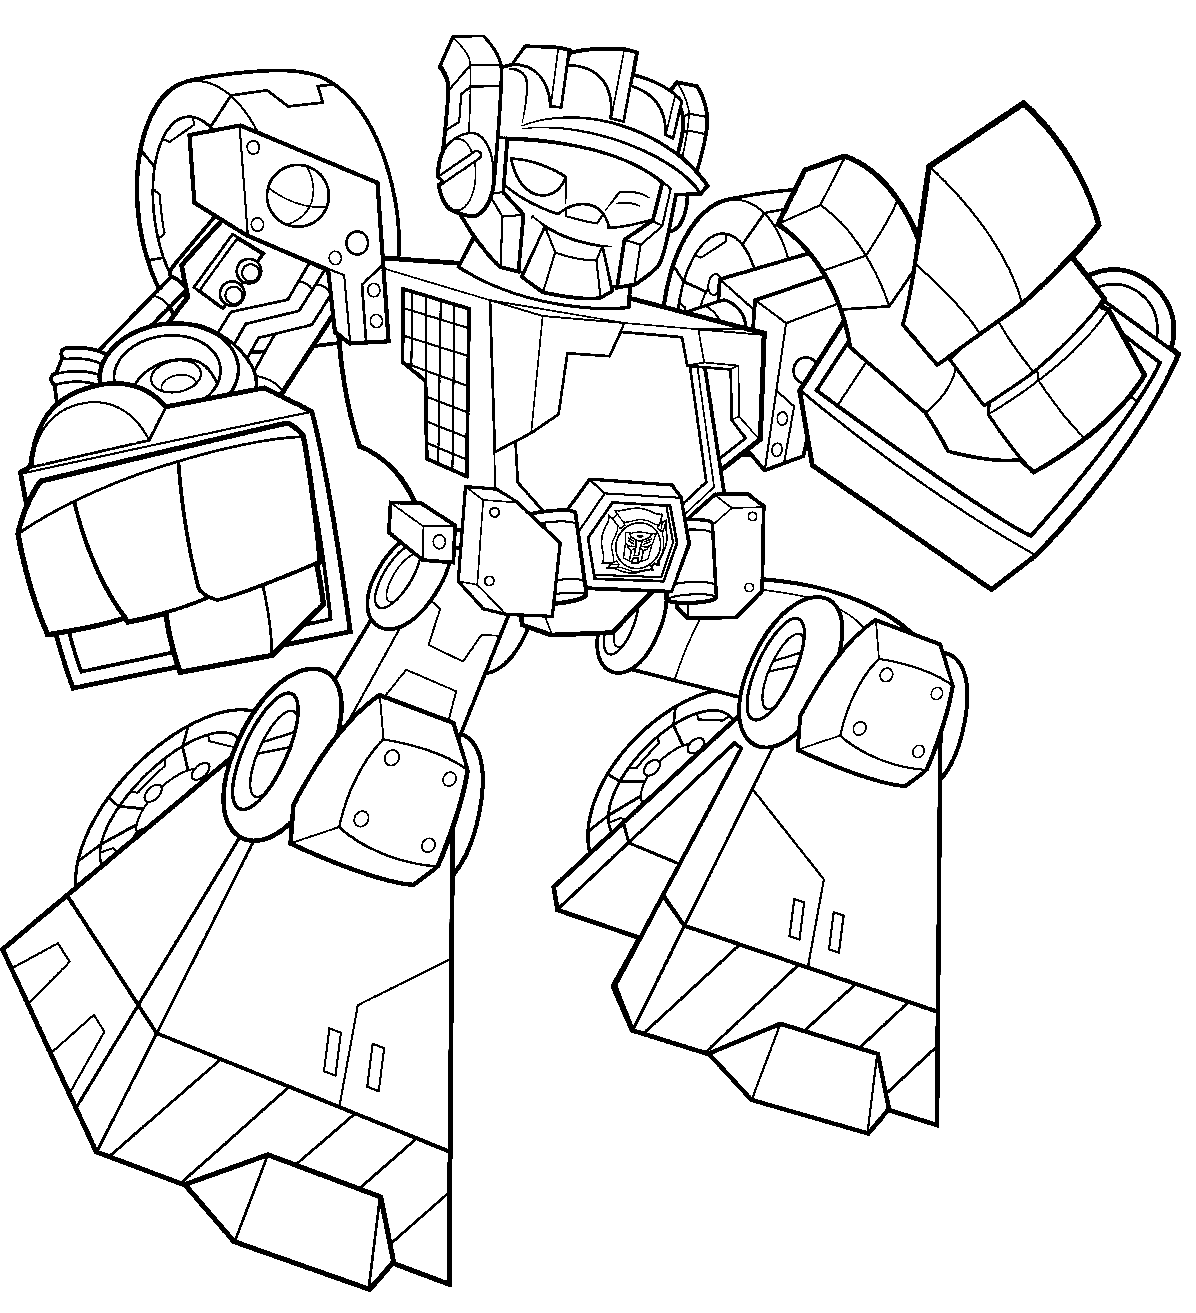 Wedge from Transformers Rescue Bots Academy Coloring Page